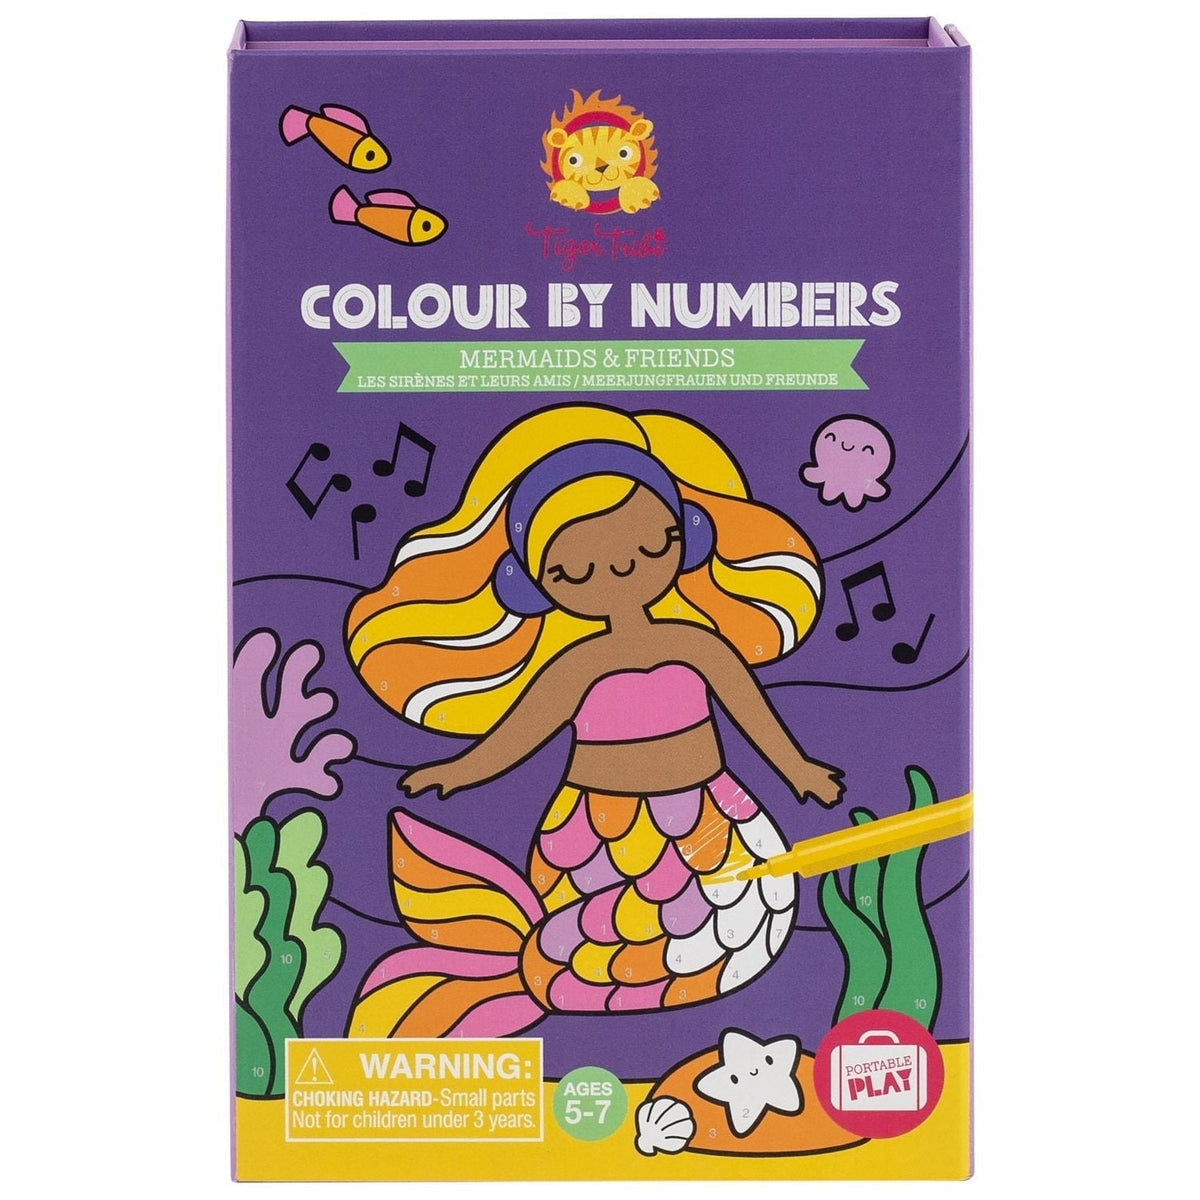 Colour by Numbers - Mermaids and Friends